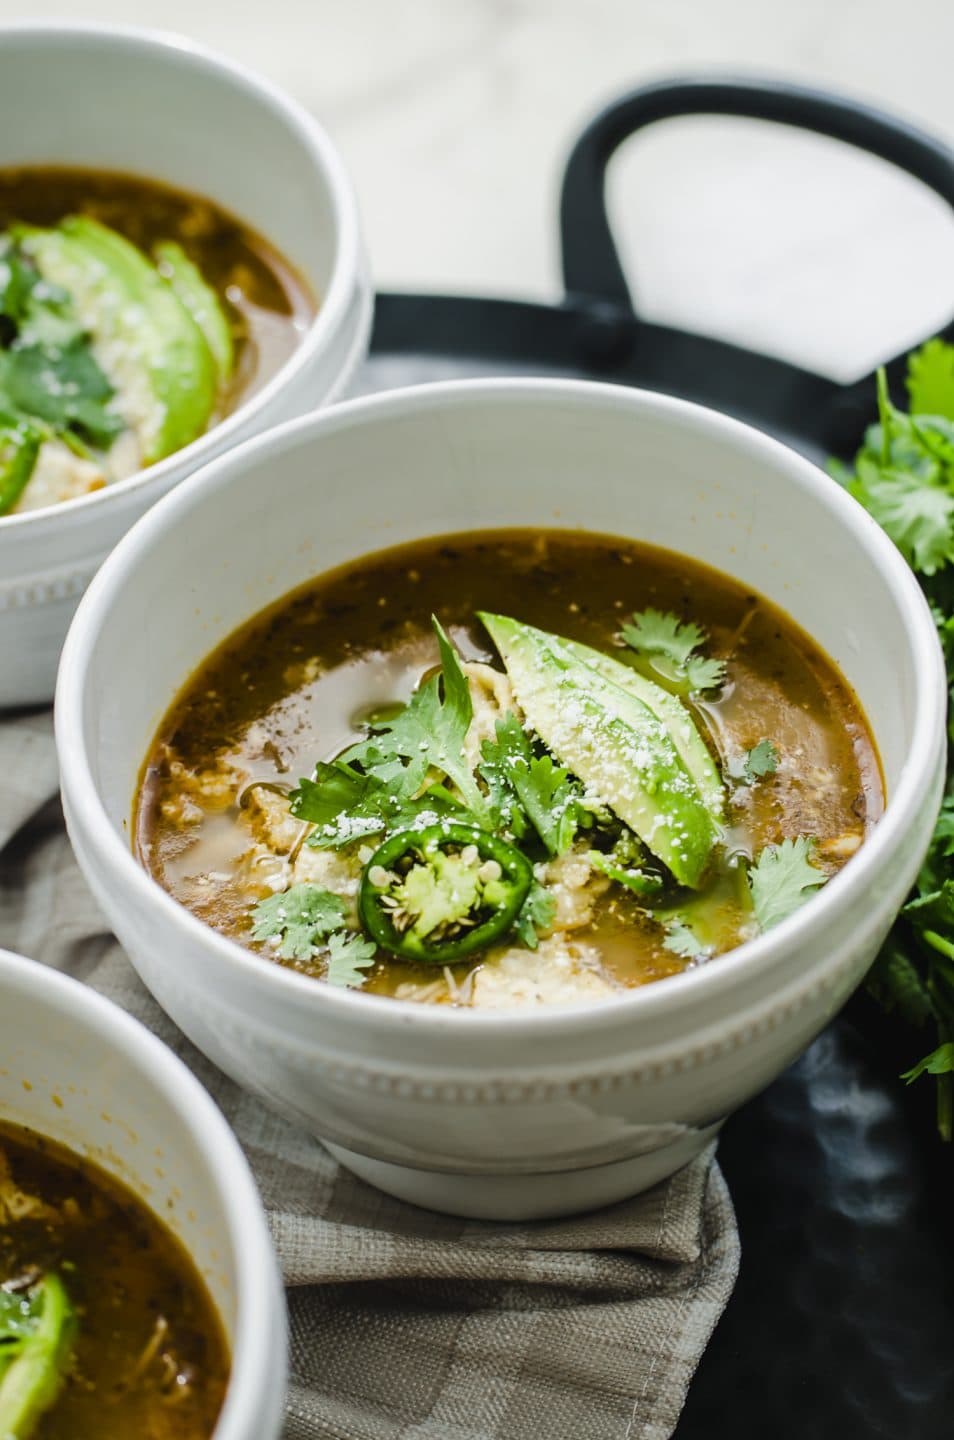 A white bowl of soup filled with posole verde and garnished with avocado and cilantro.